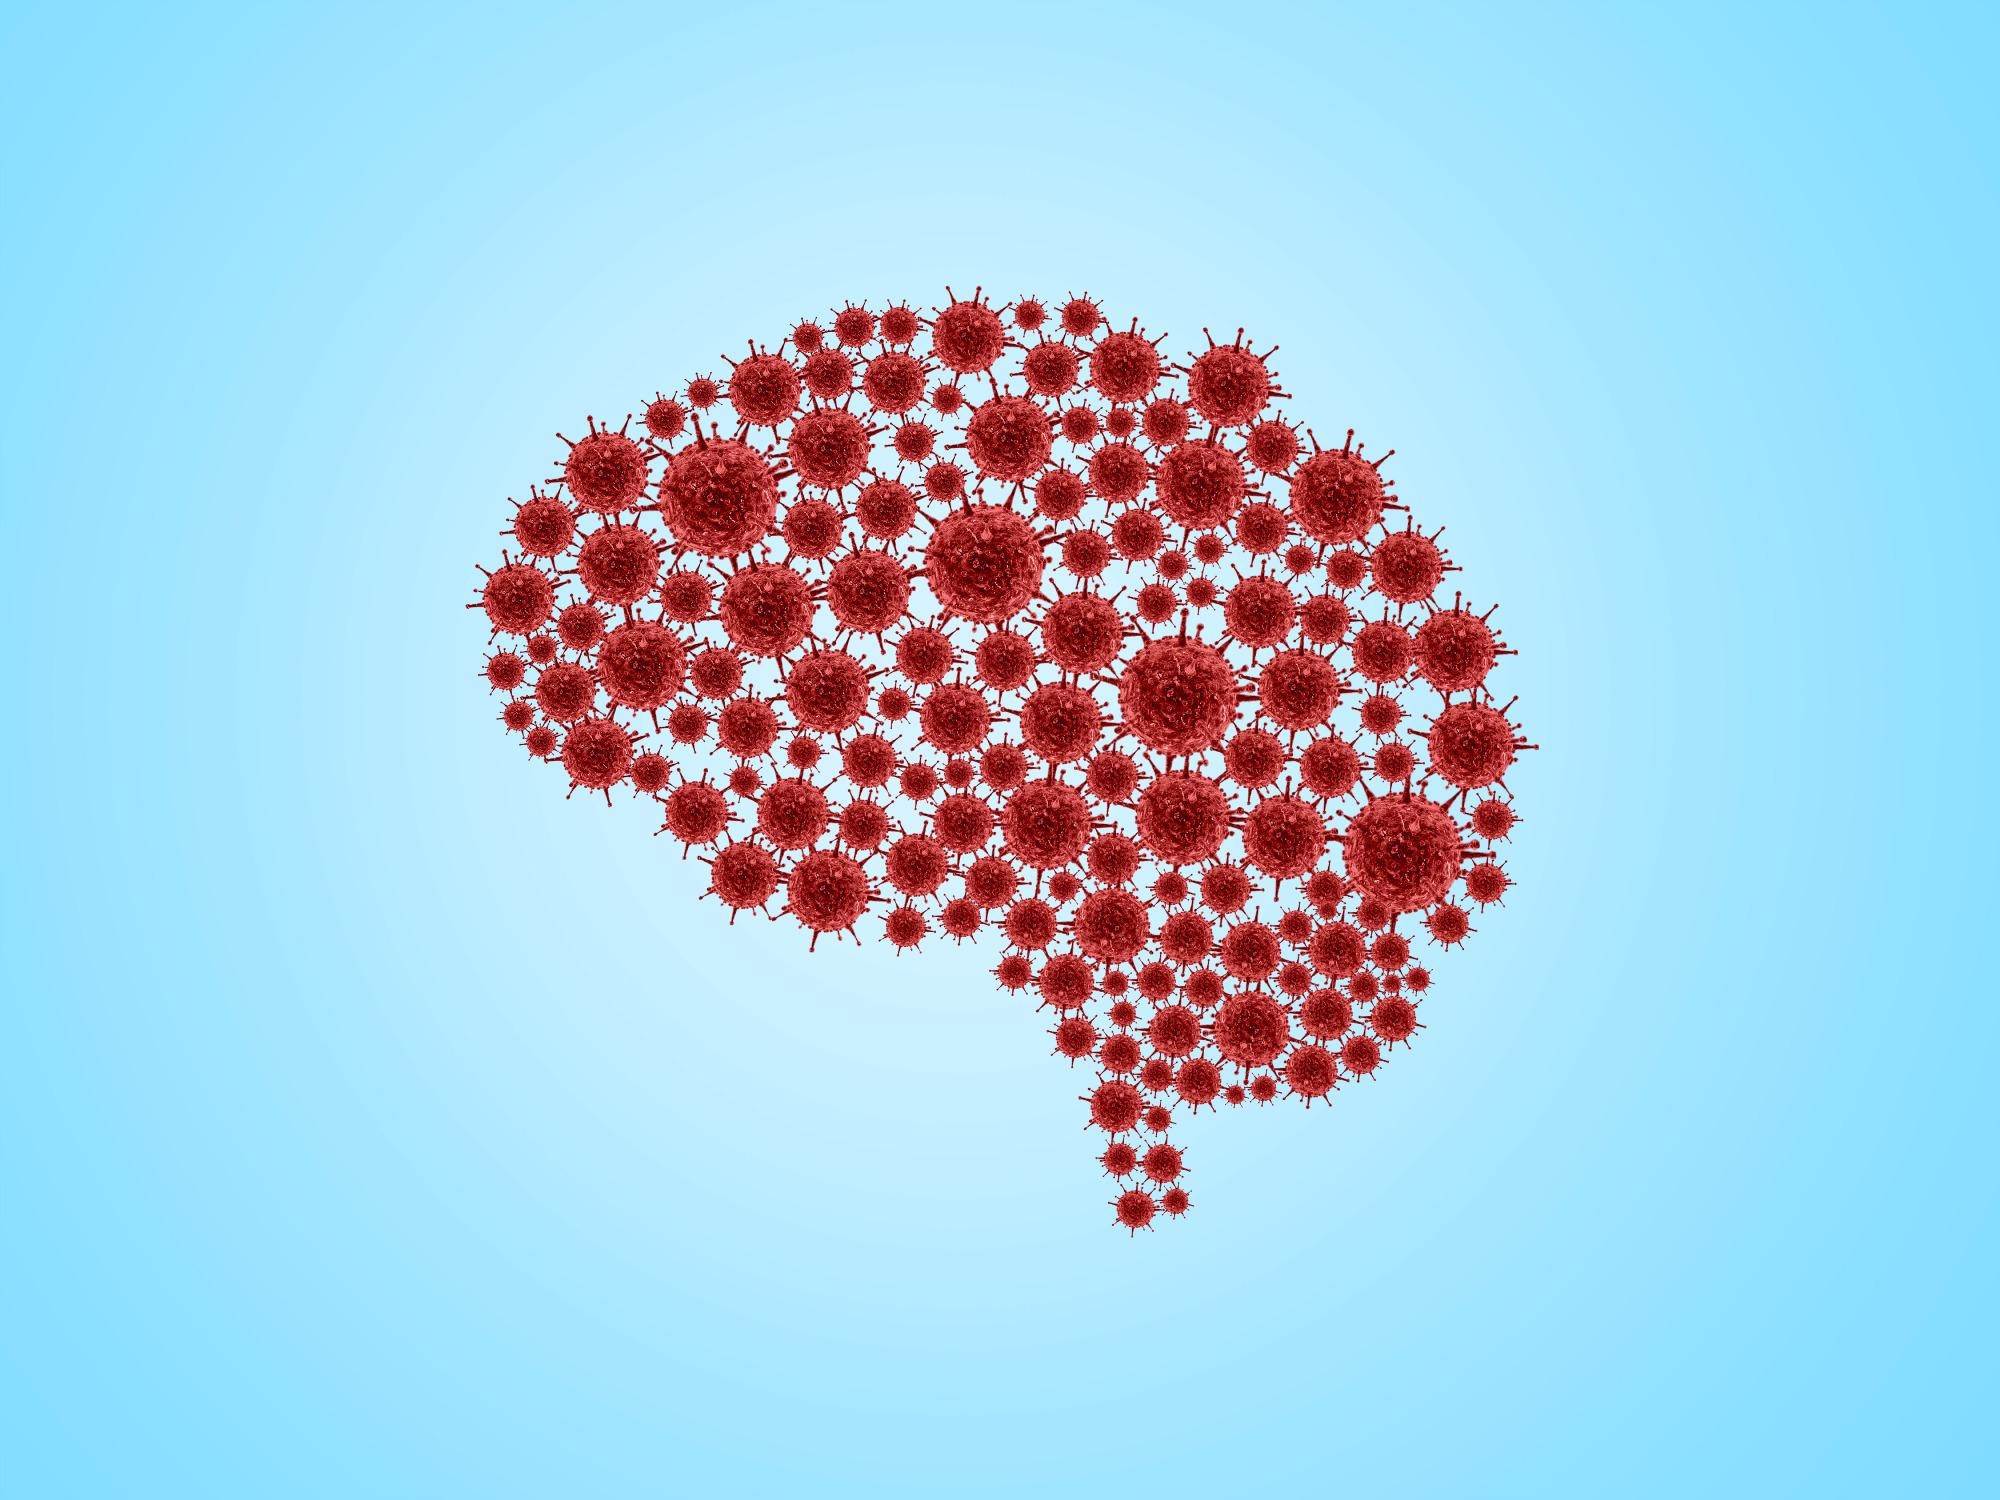 Study: Decreased cerebral blood flow in non-hospitalized adults who self-isolated due to COVID-19. Image Credit: DOERS / Shutterstock